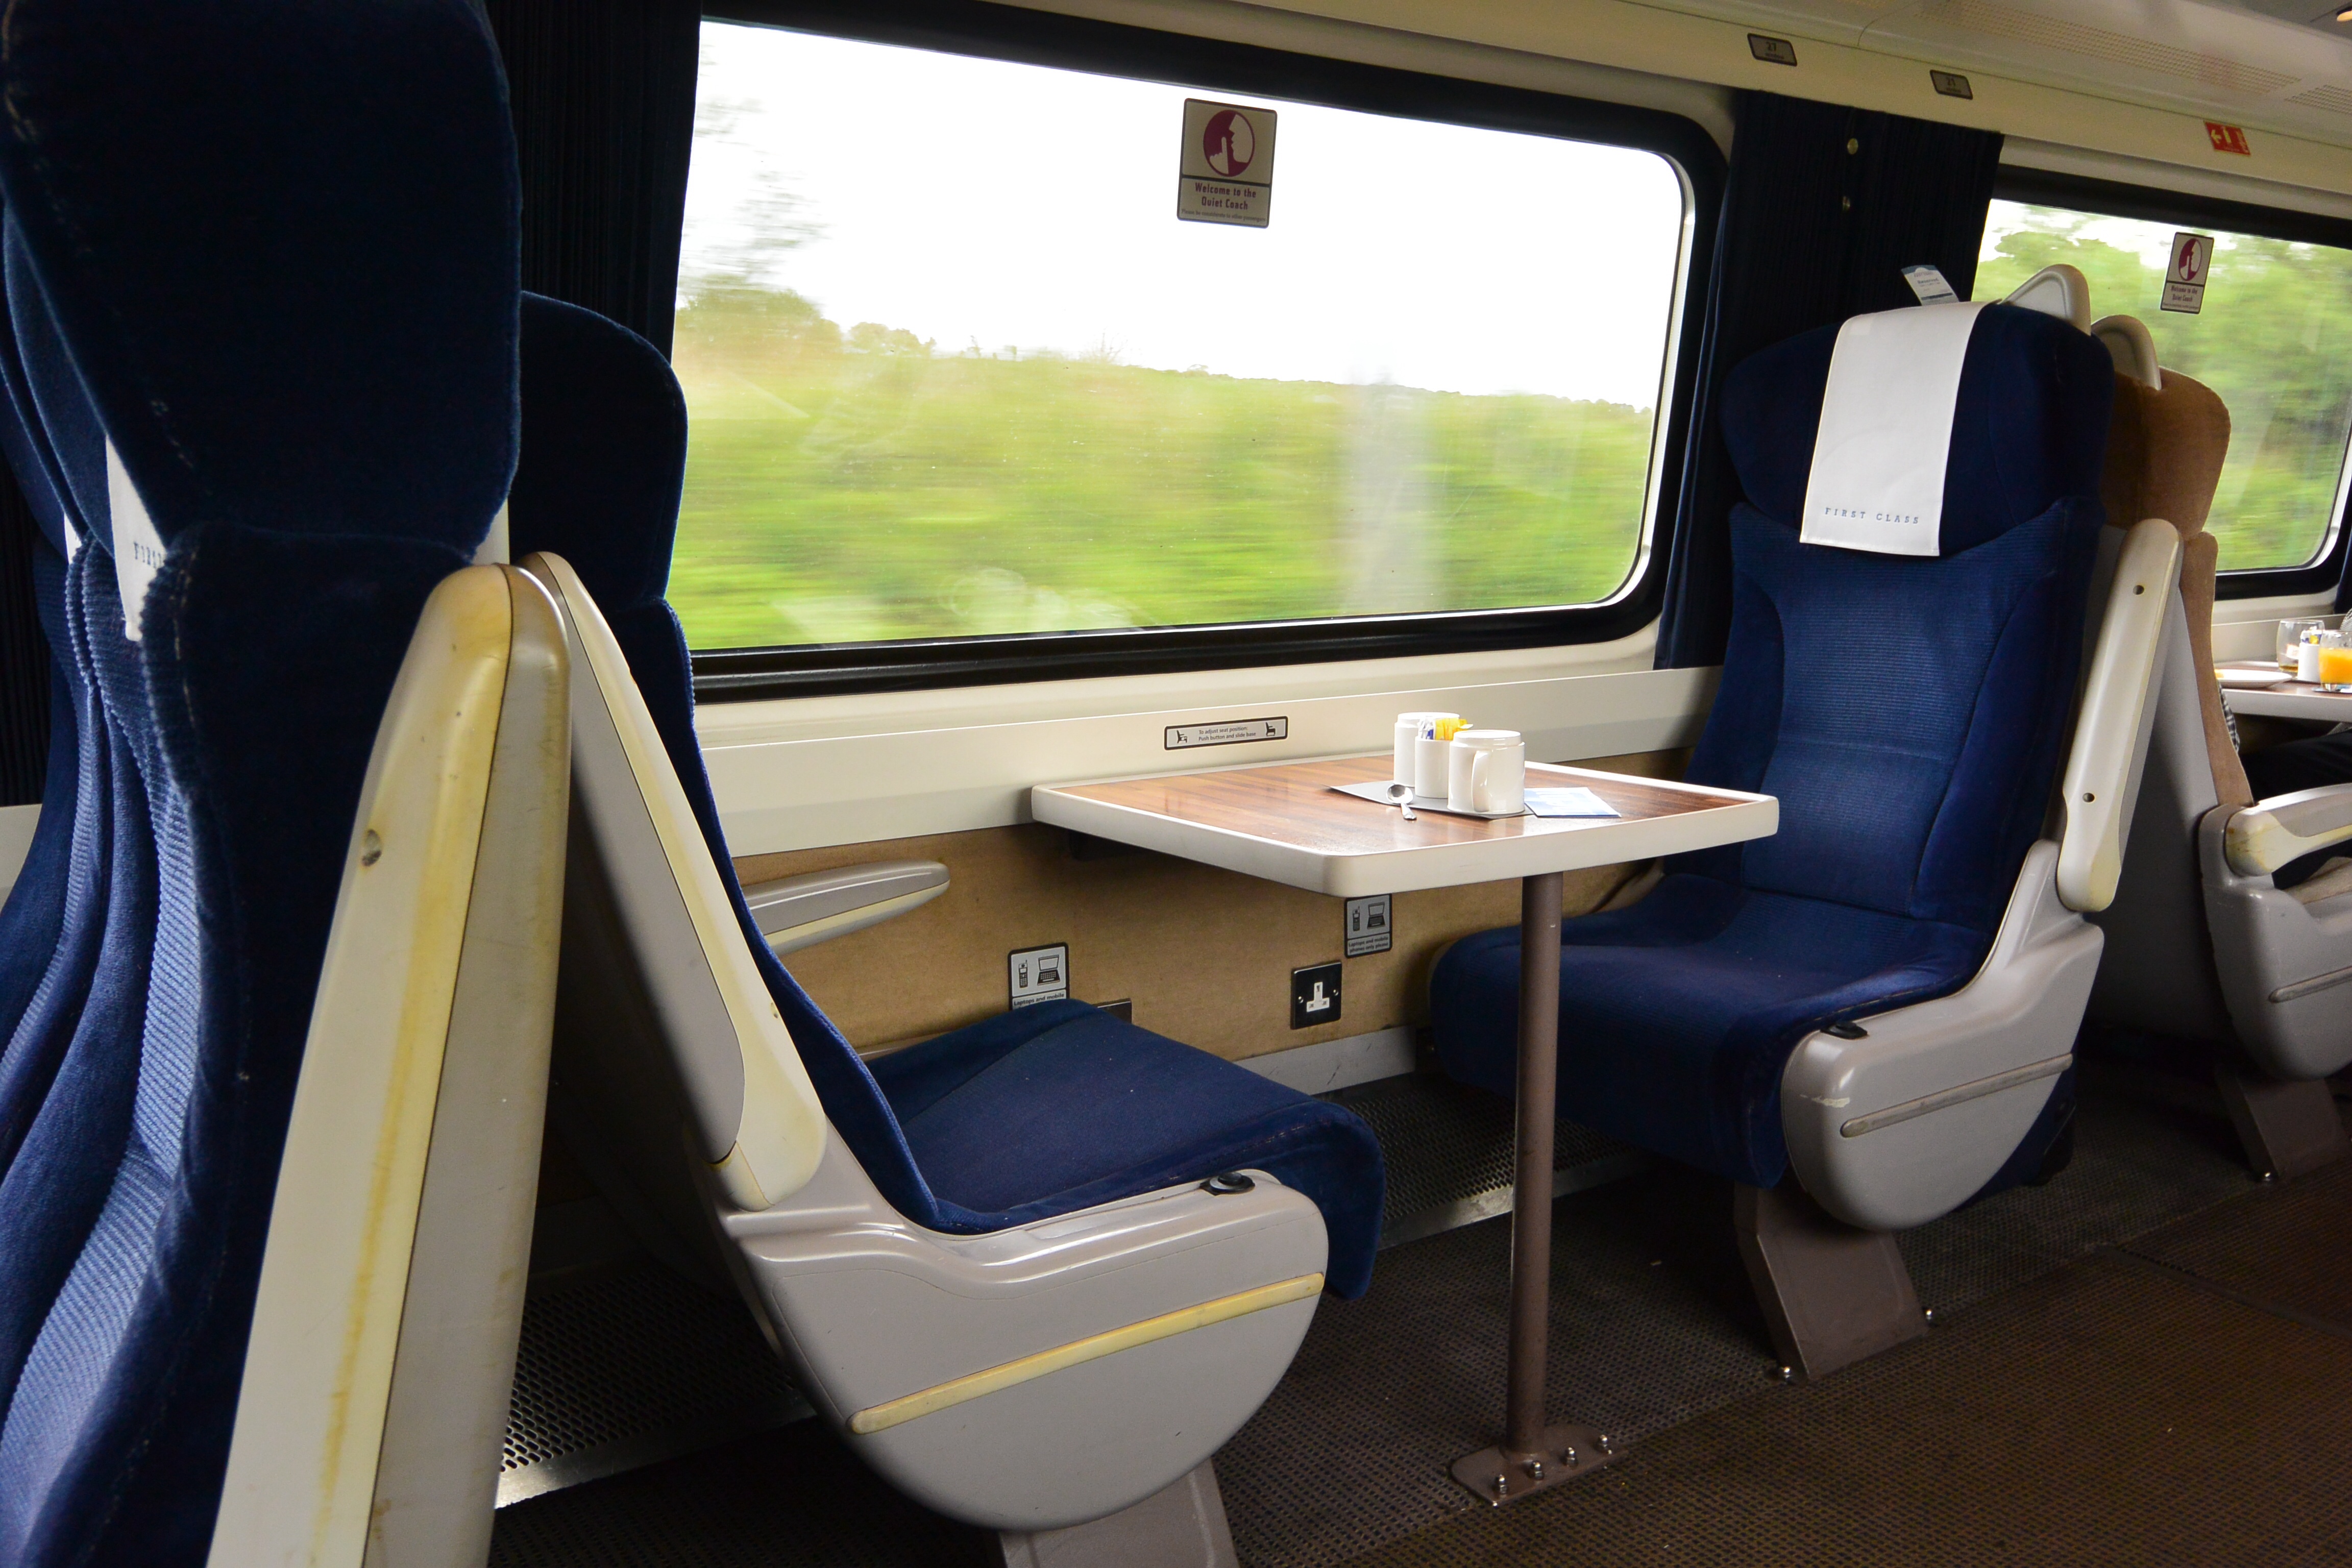 train seating | The Bent Page